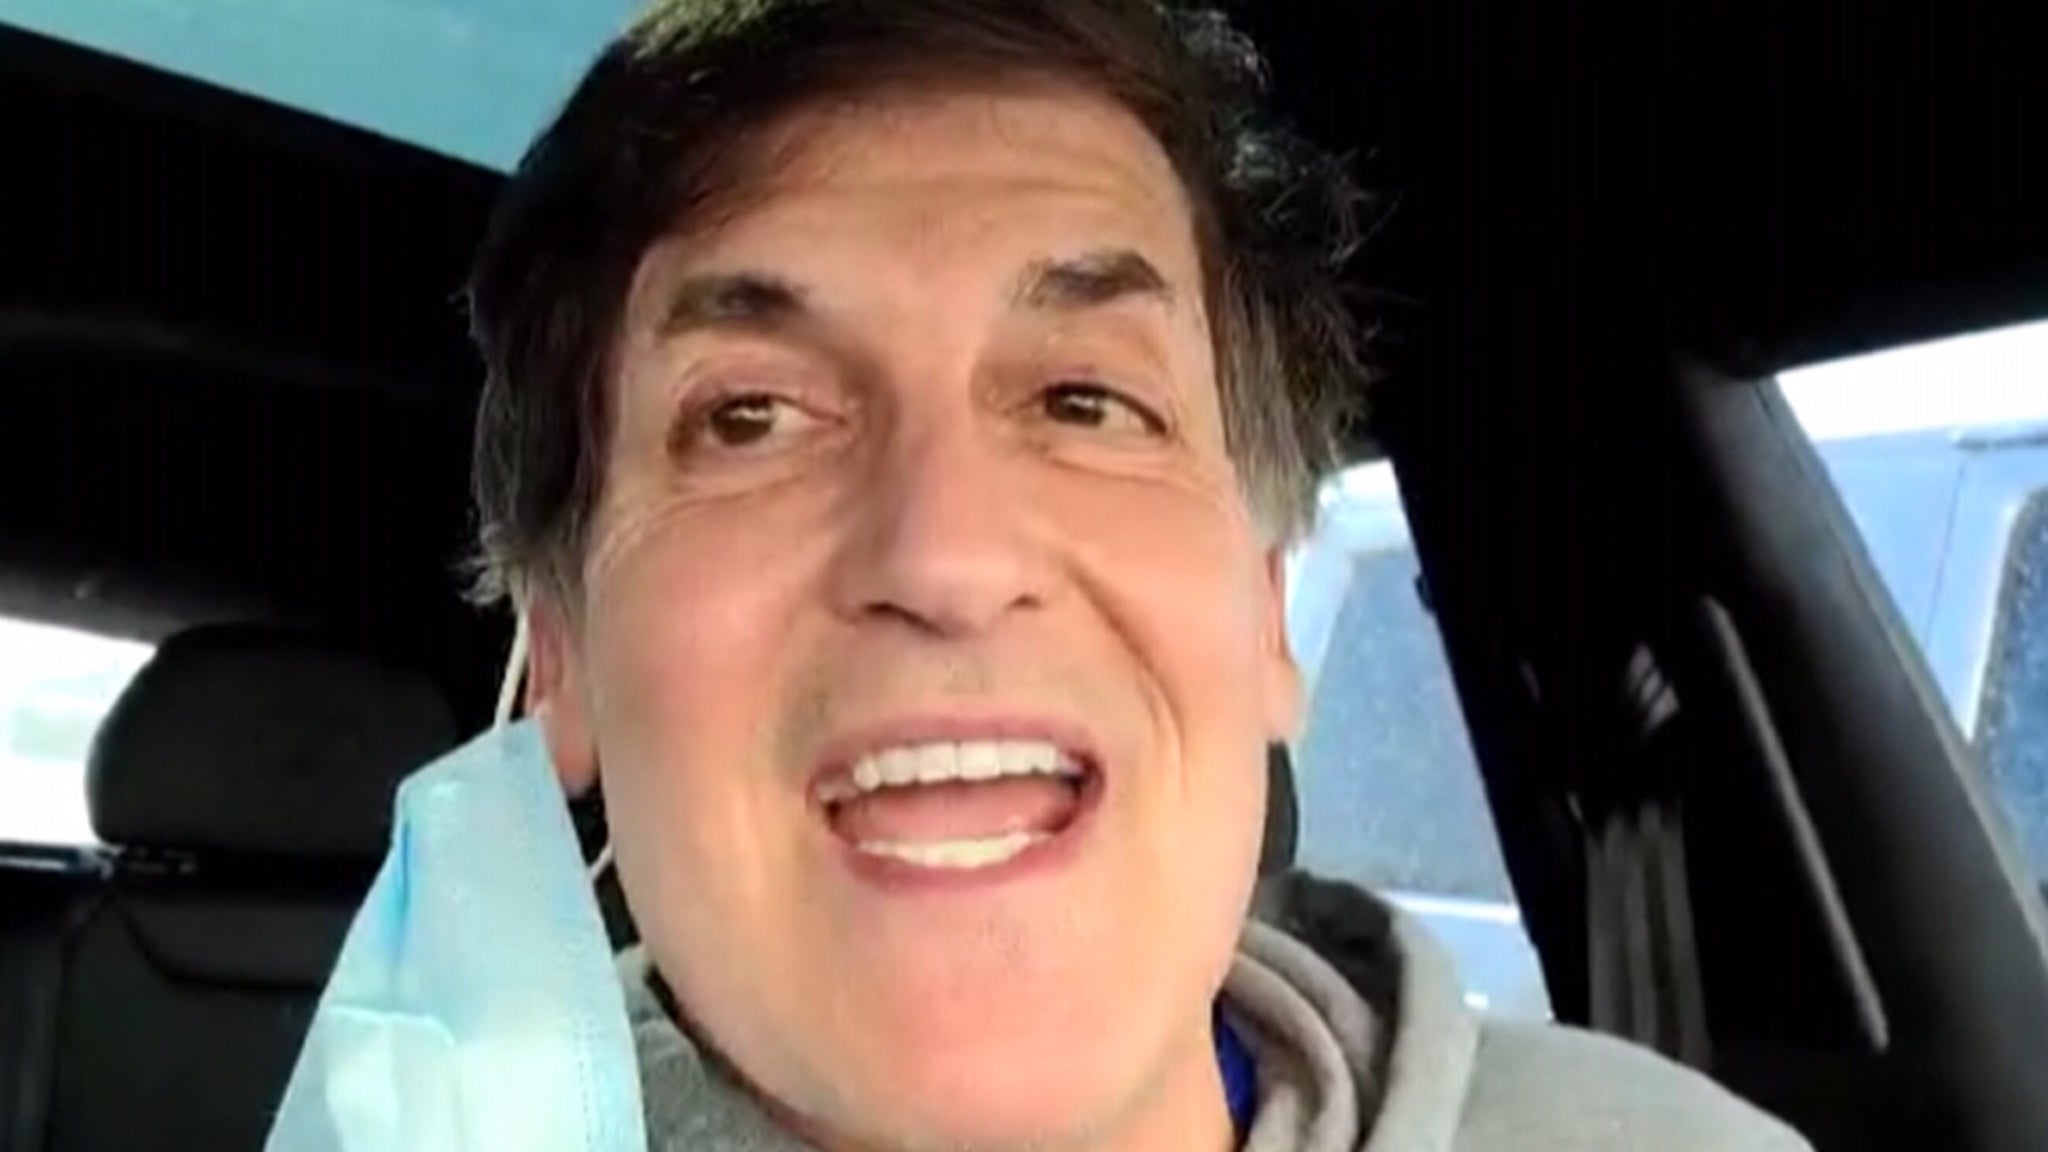 Mark Cuban says his 11-year-old son trades stocks, learning difficult lessons